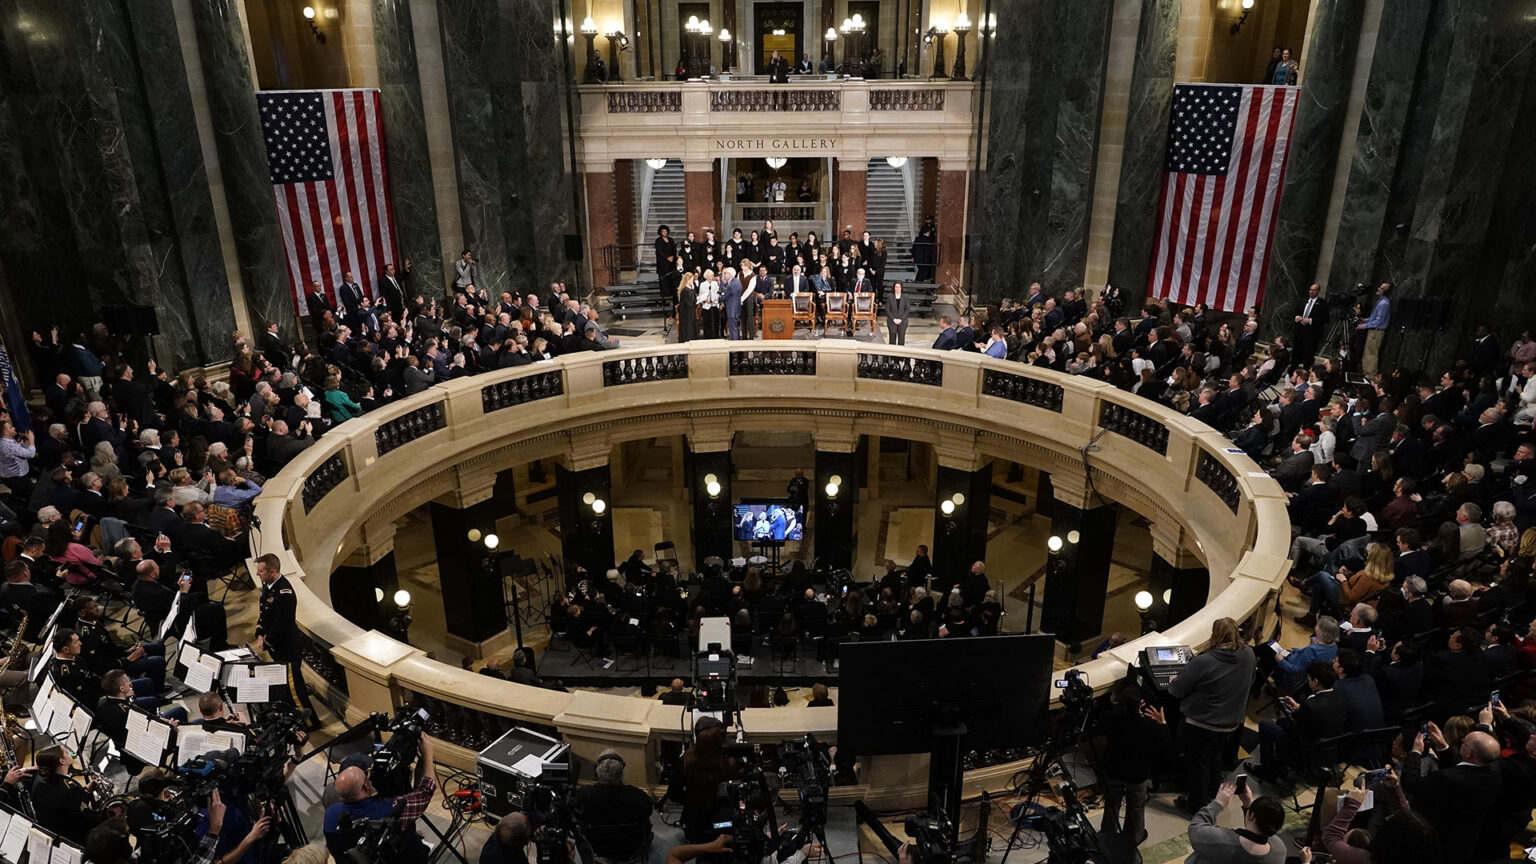 Tony Evers stands and delivers his oath of office while standing next to a railing in the Wisconsin Capitol Rotunda, which is decorated with two large U.S. flags and with audience members, musicians and journalists seated and standing around the circle and on the ground floor level below.